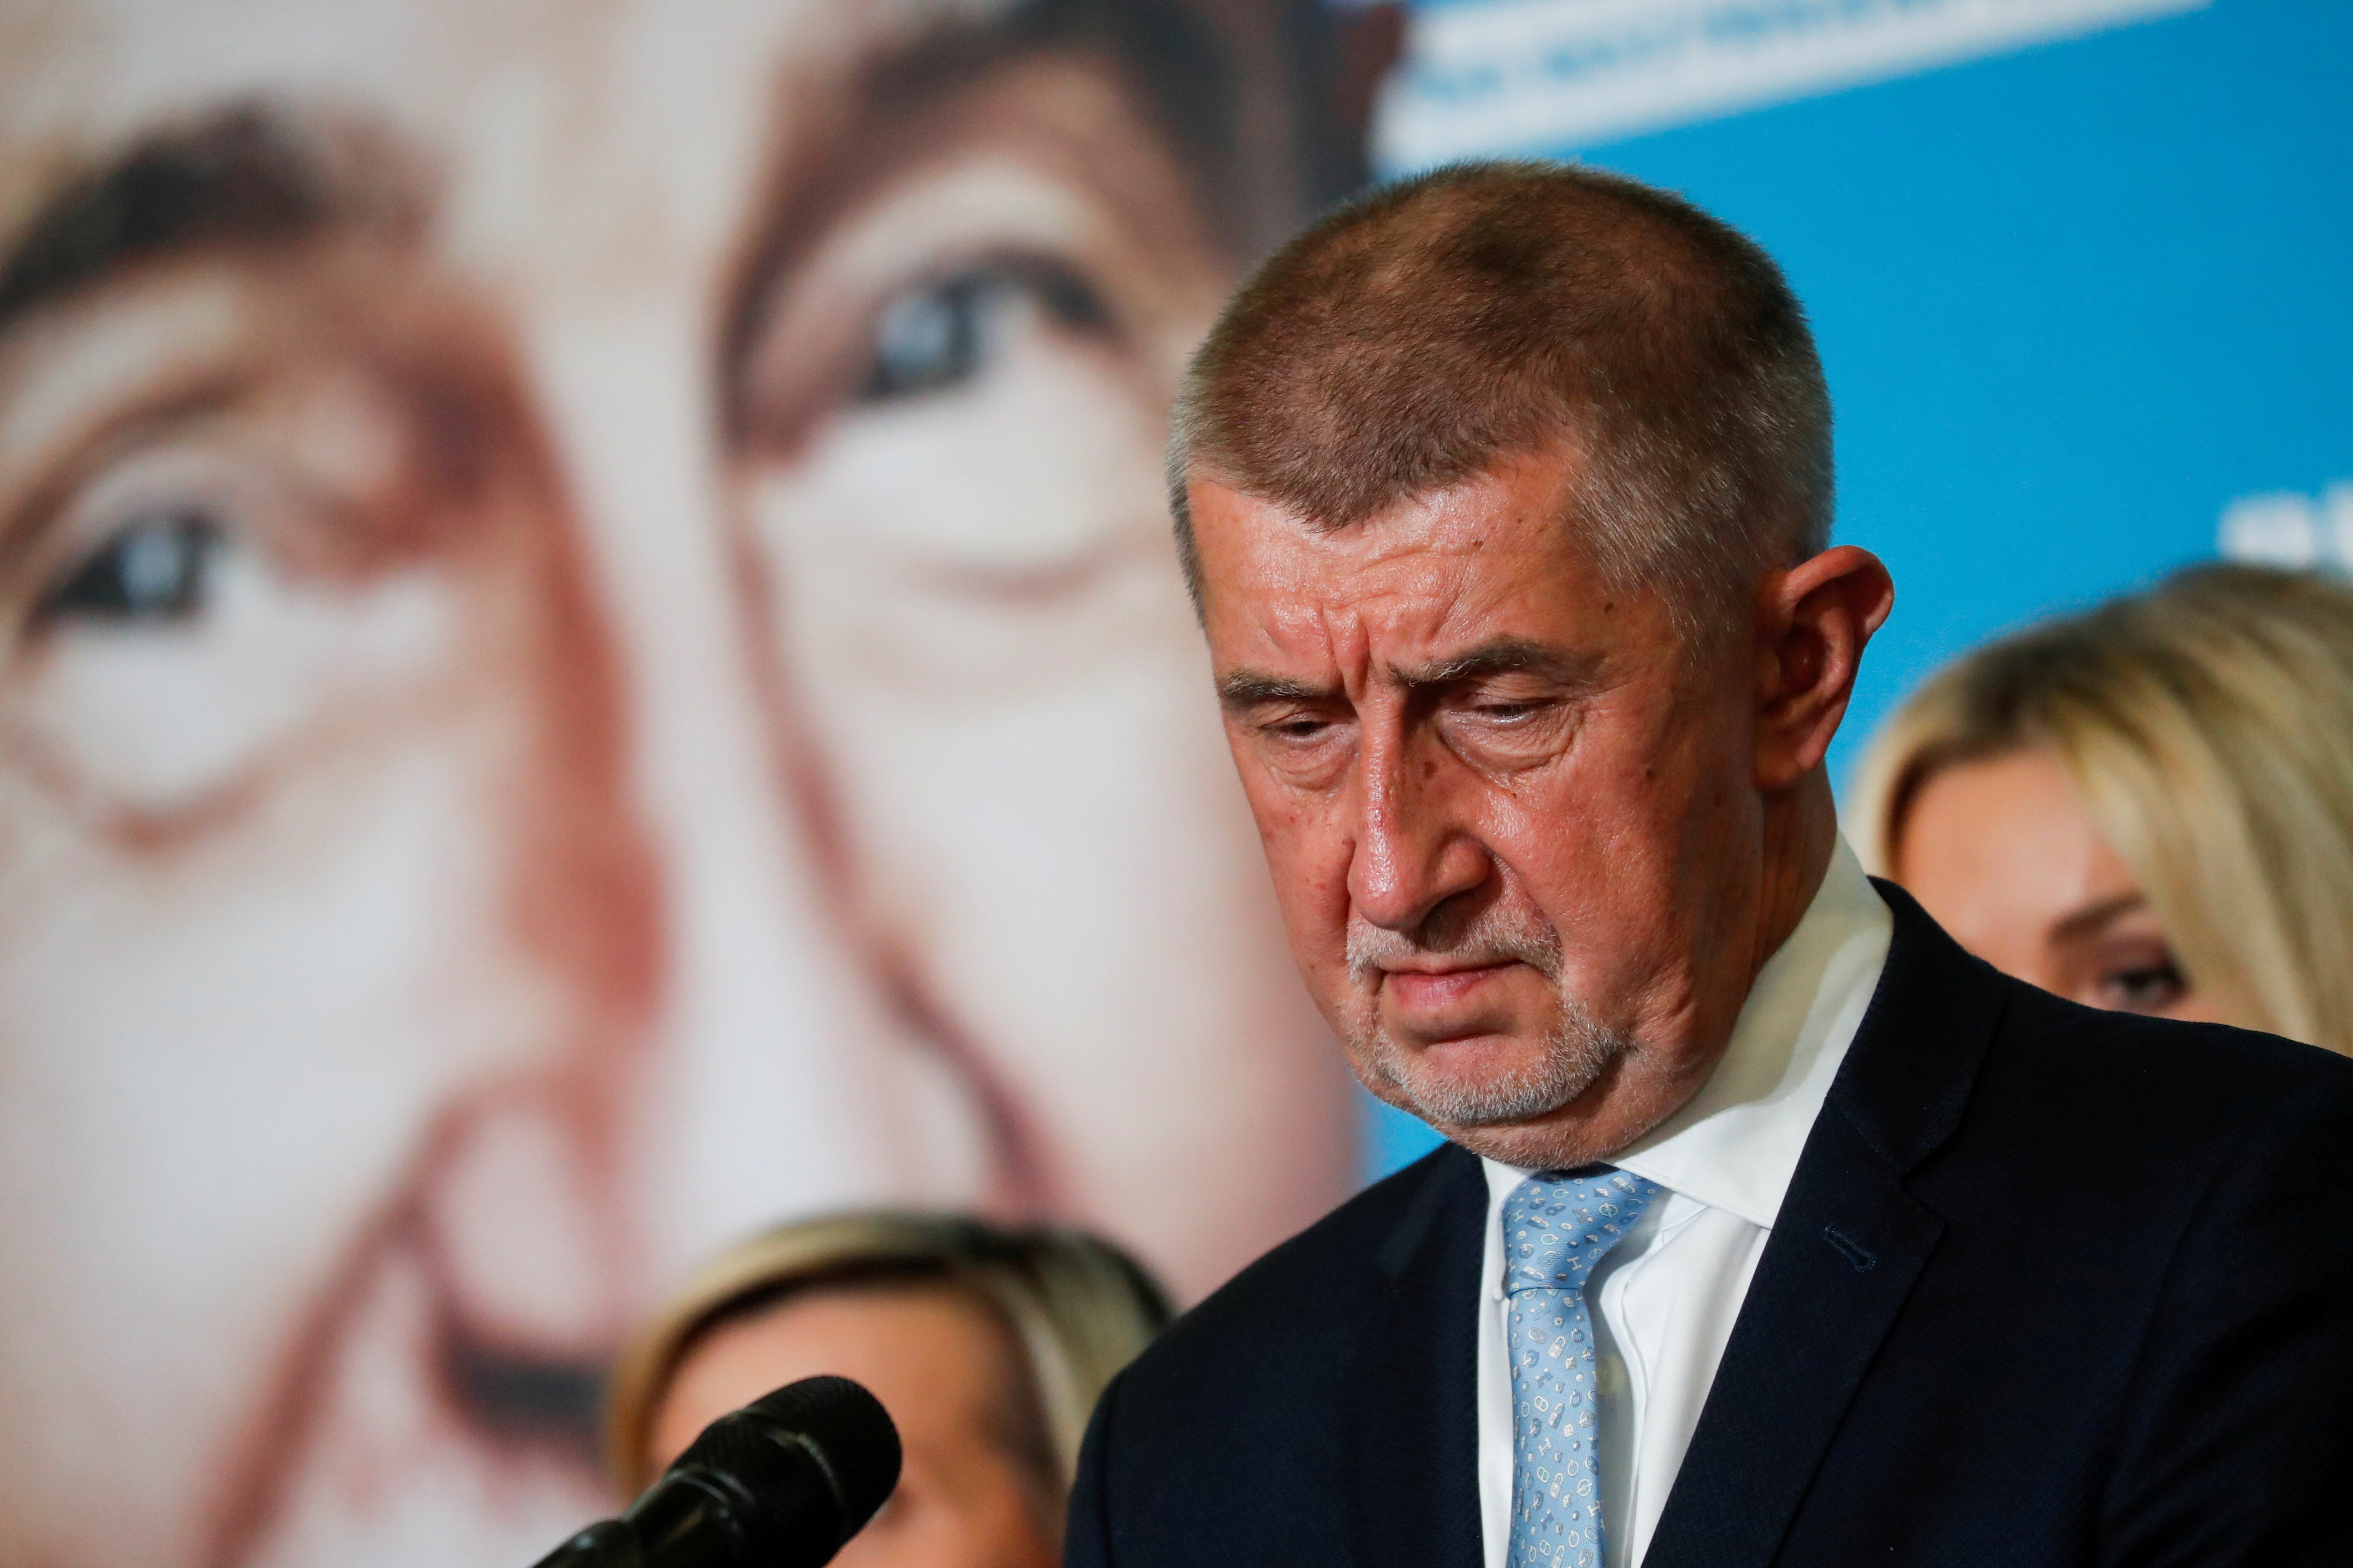 Czech Prime Minister and leader of ANO party Andrej Babis reacts during a news conference at the party's election headquarters after the country's parliamentary election in Prague, Czech Republic, October 9, 2021. REUTERS/Bernadett Szabo